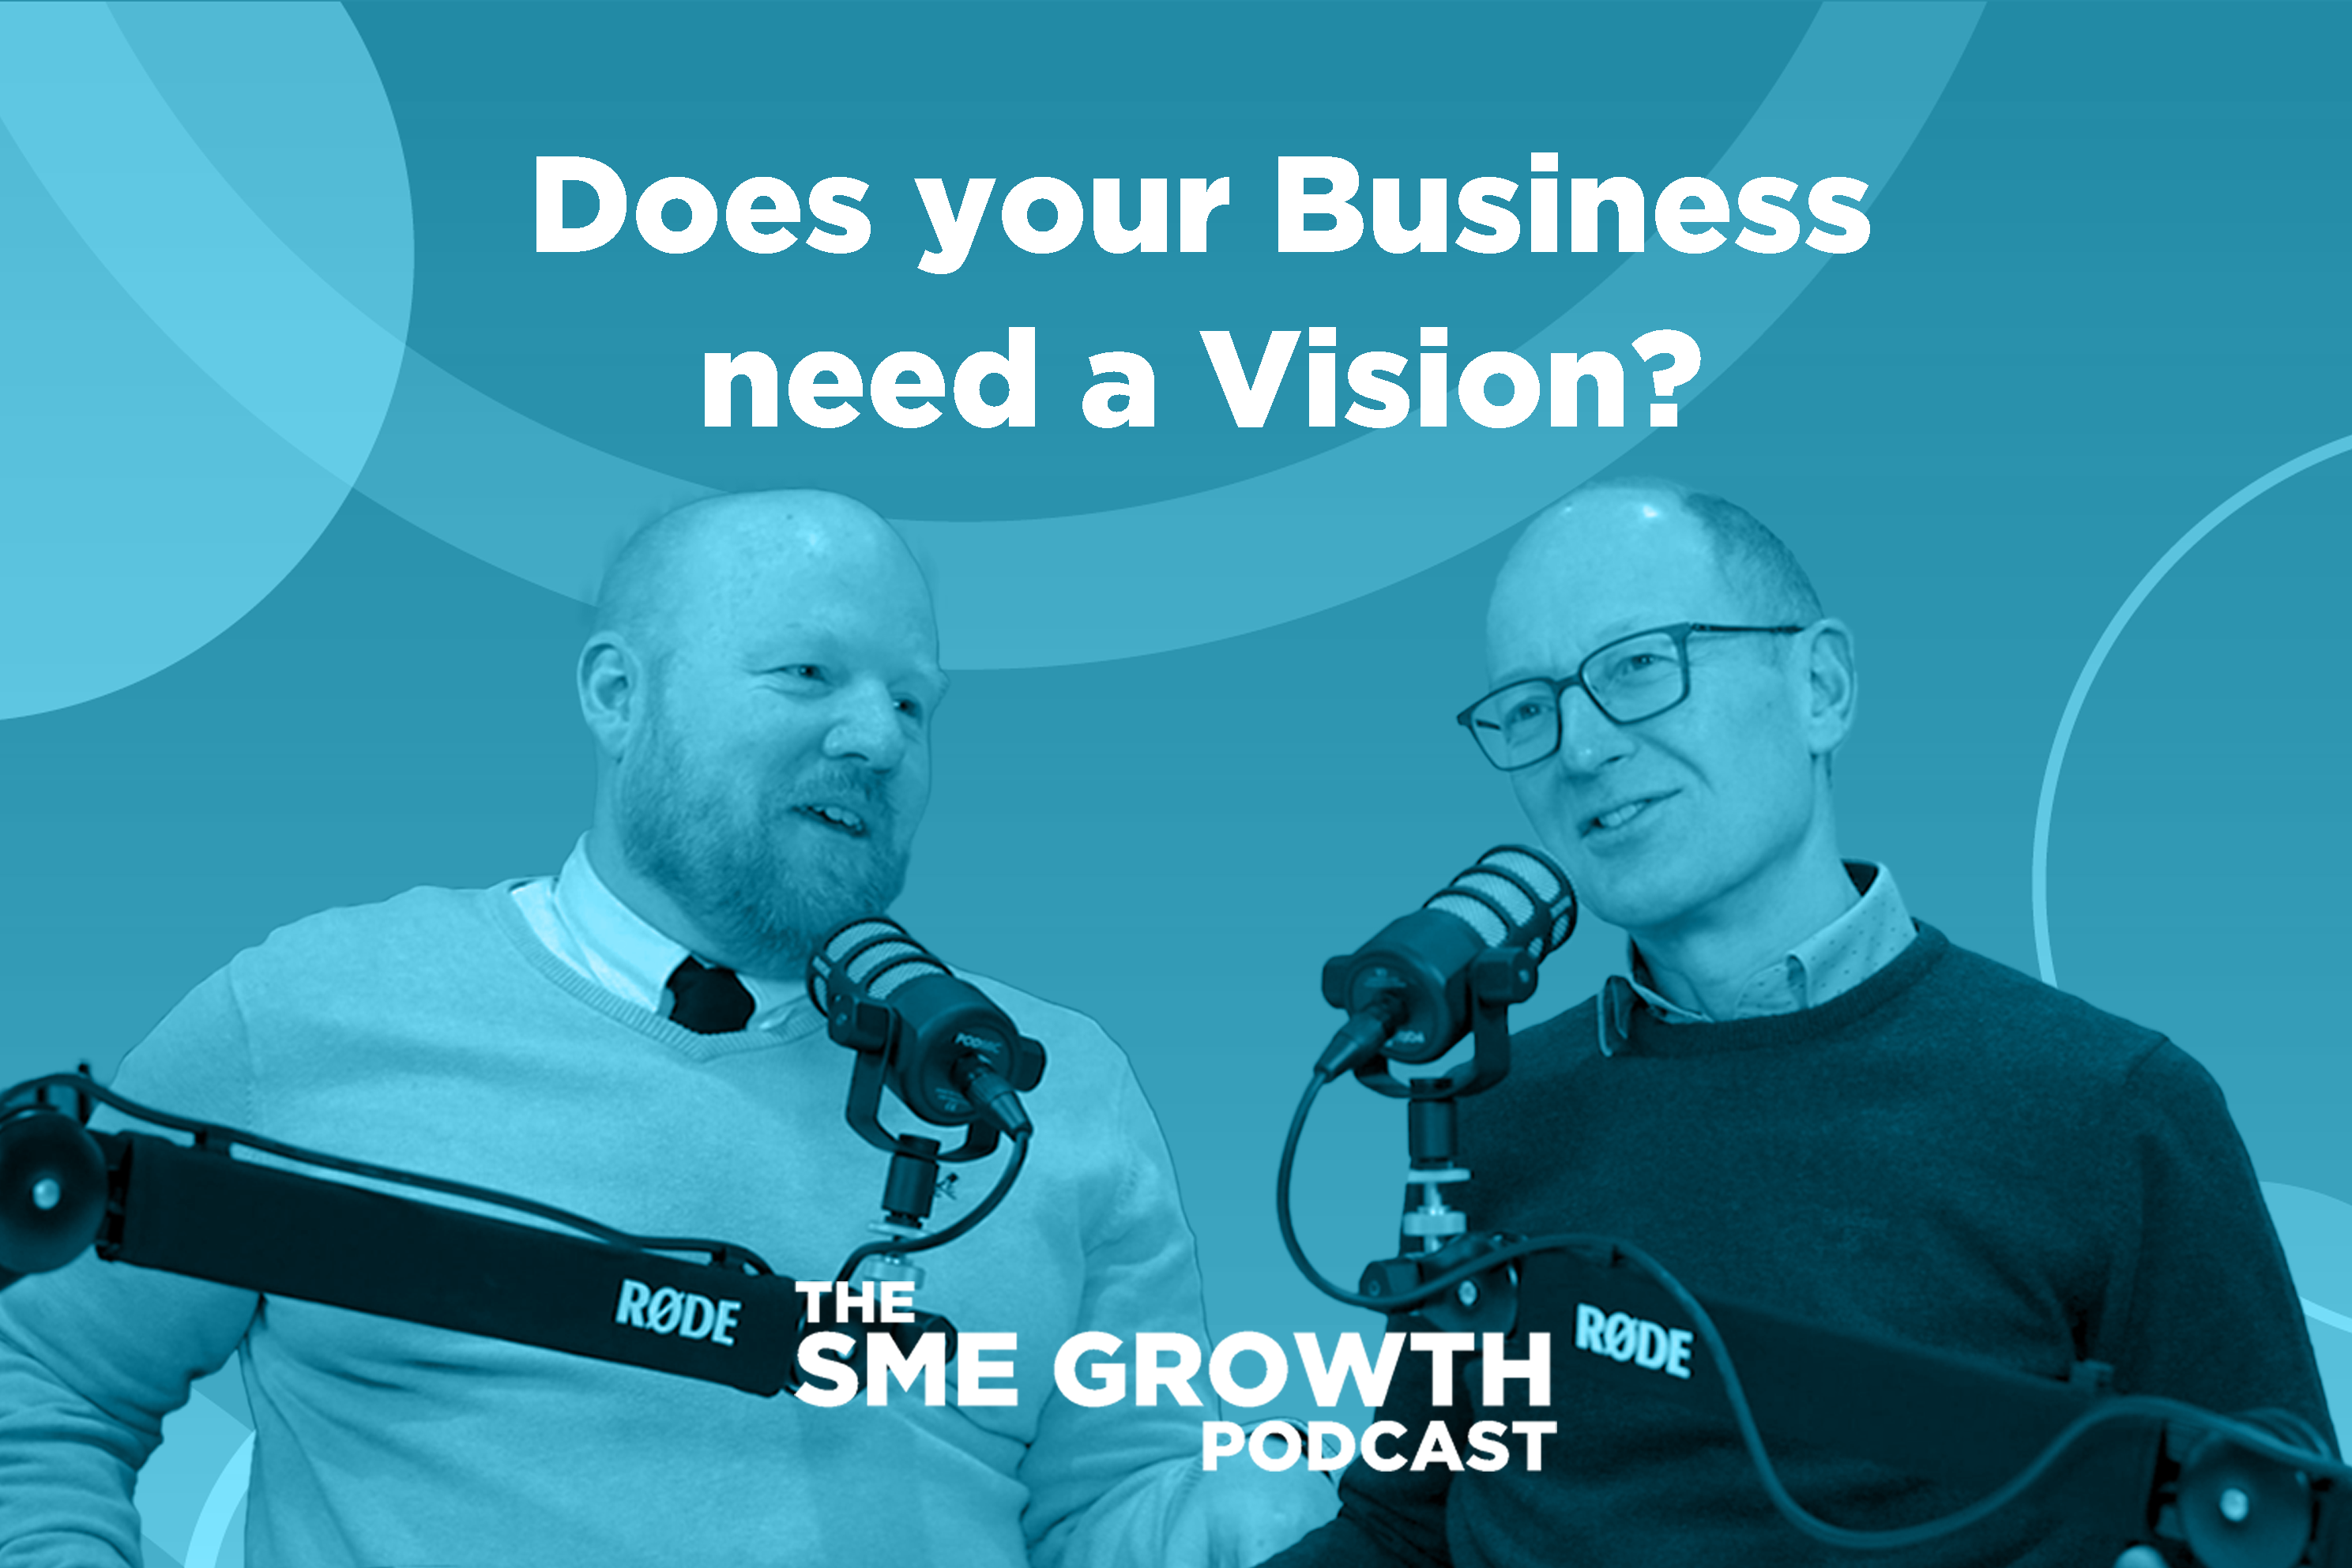 Does your business need a vision? The SME Growth Podcast Cover Blue banner with two males speaking into microphones.